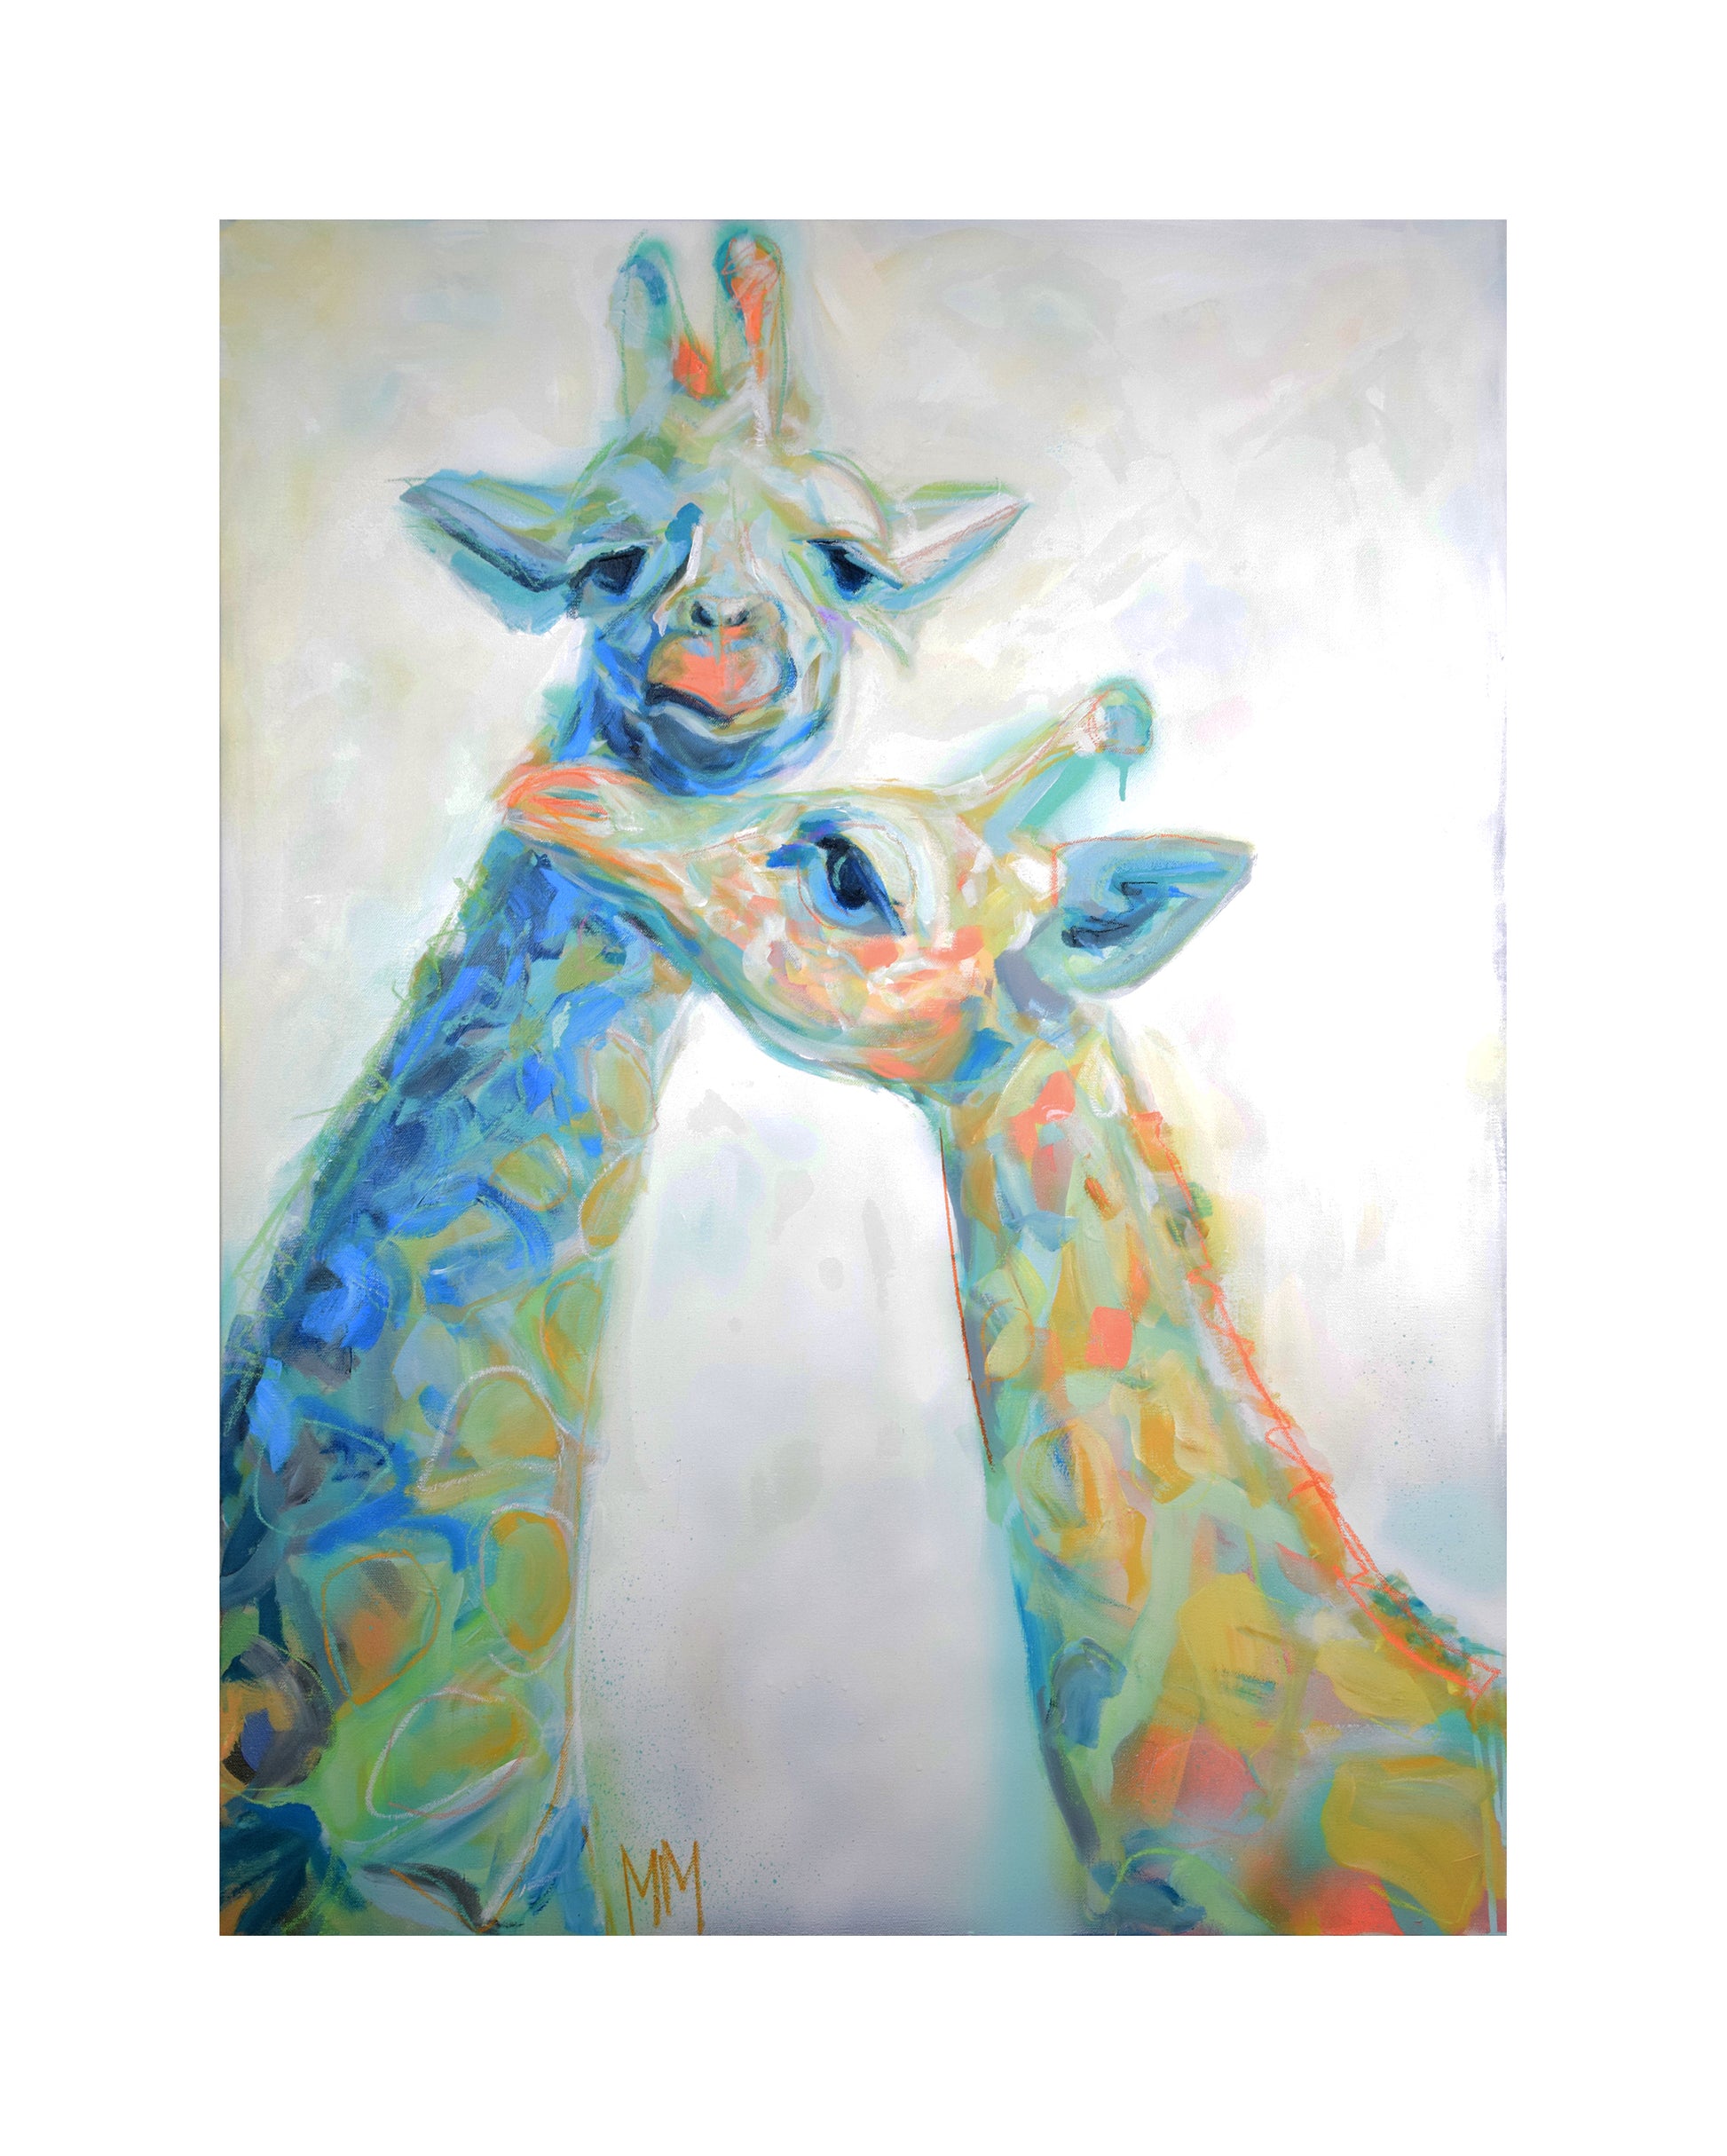 "Cora & Cleo" Print by Mallory Moye - 8 x 10 inches by Mallory Moye - K. A. Artist Shop